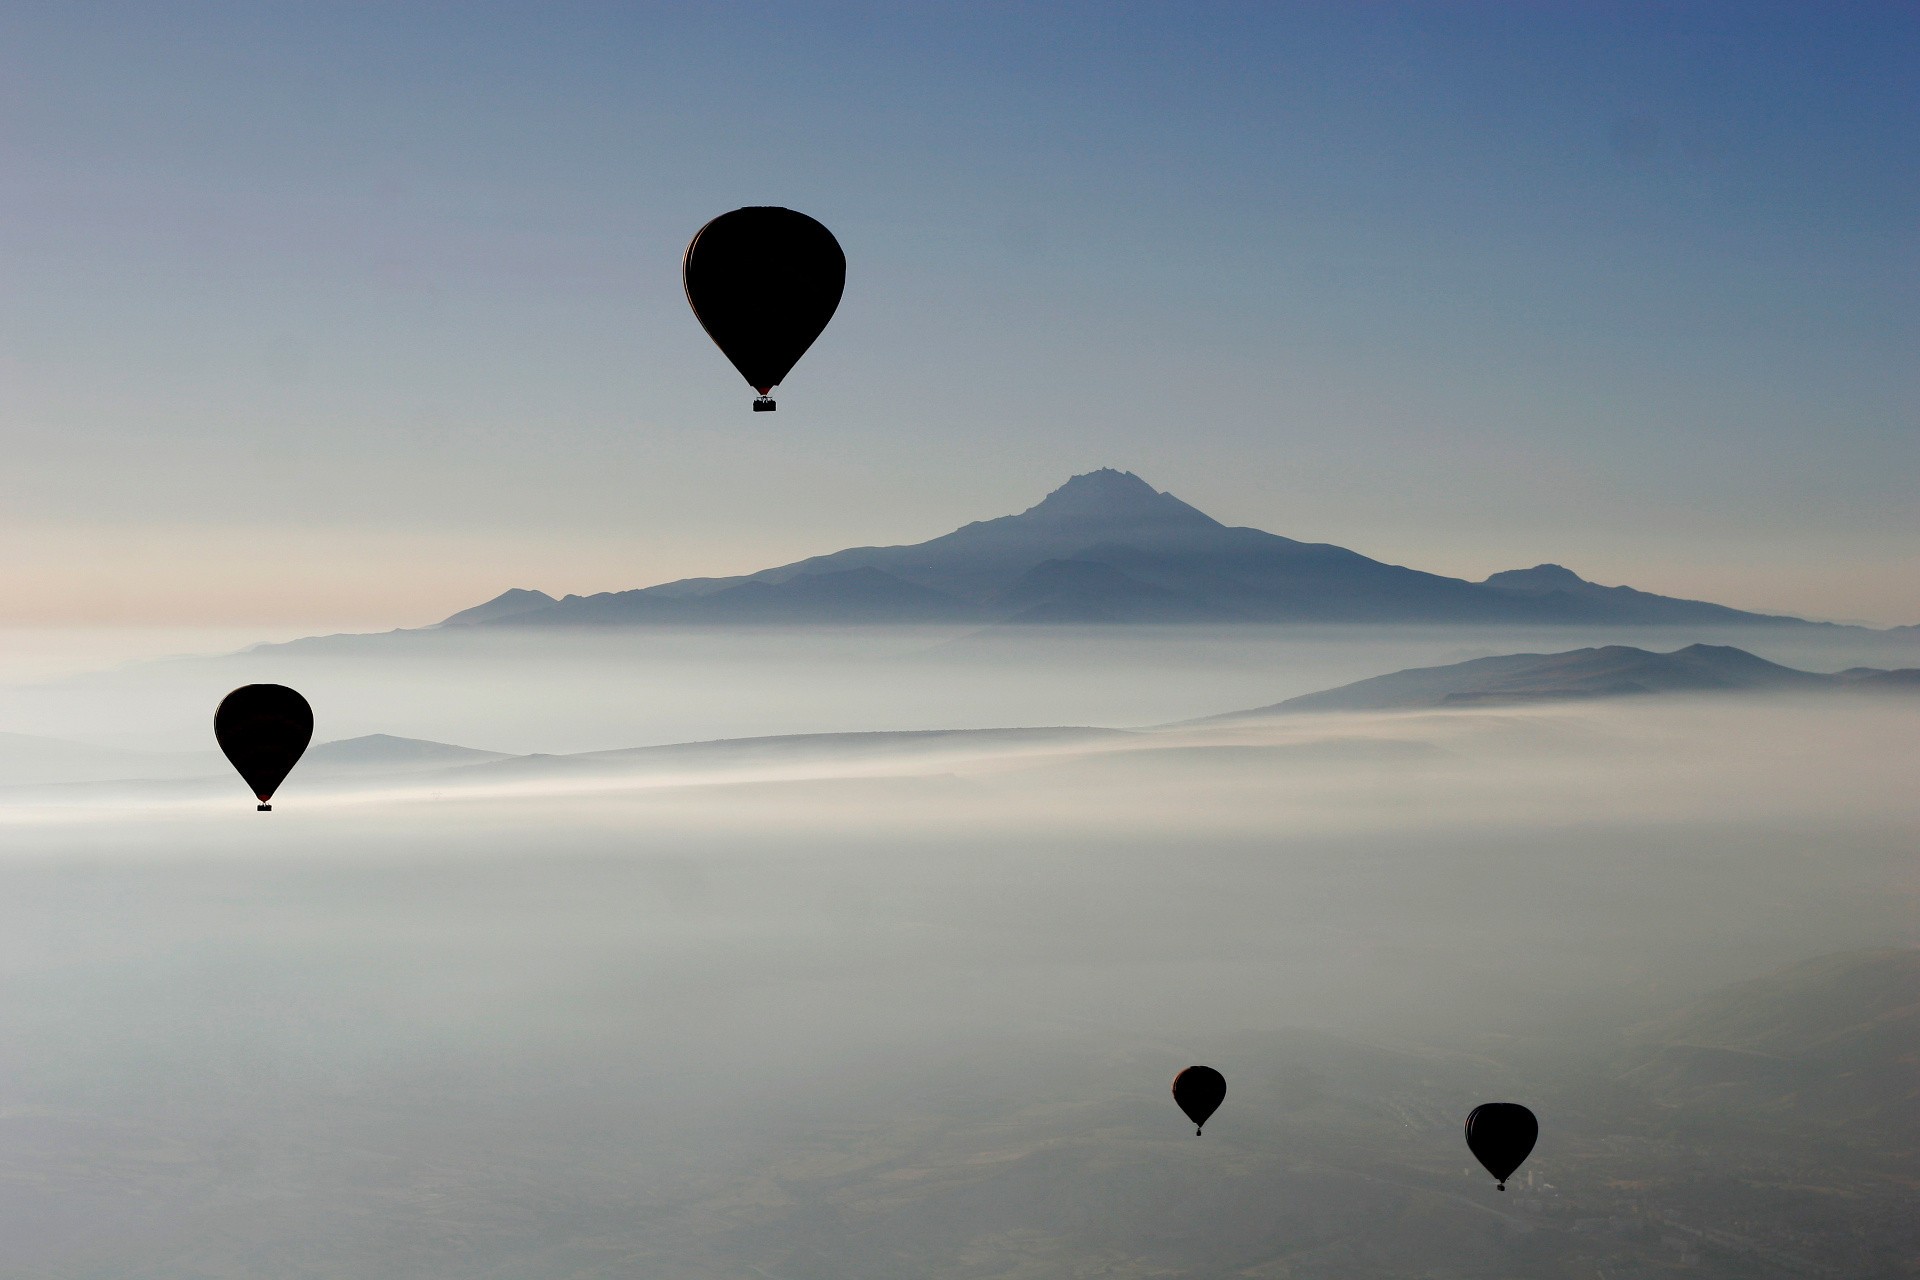 General 1920x1280 photography landscape nature mountains balloon hot air balloons mist vehicle sky